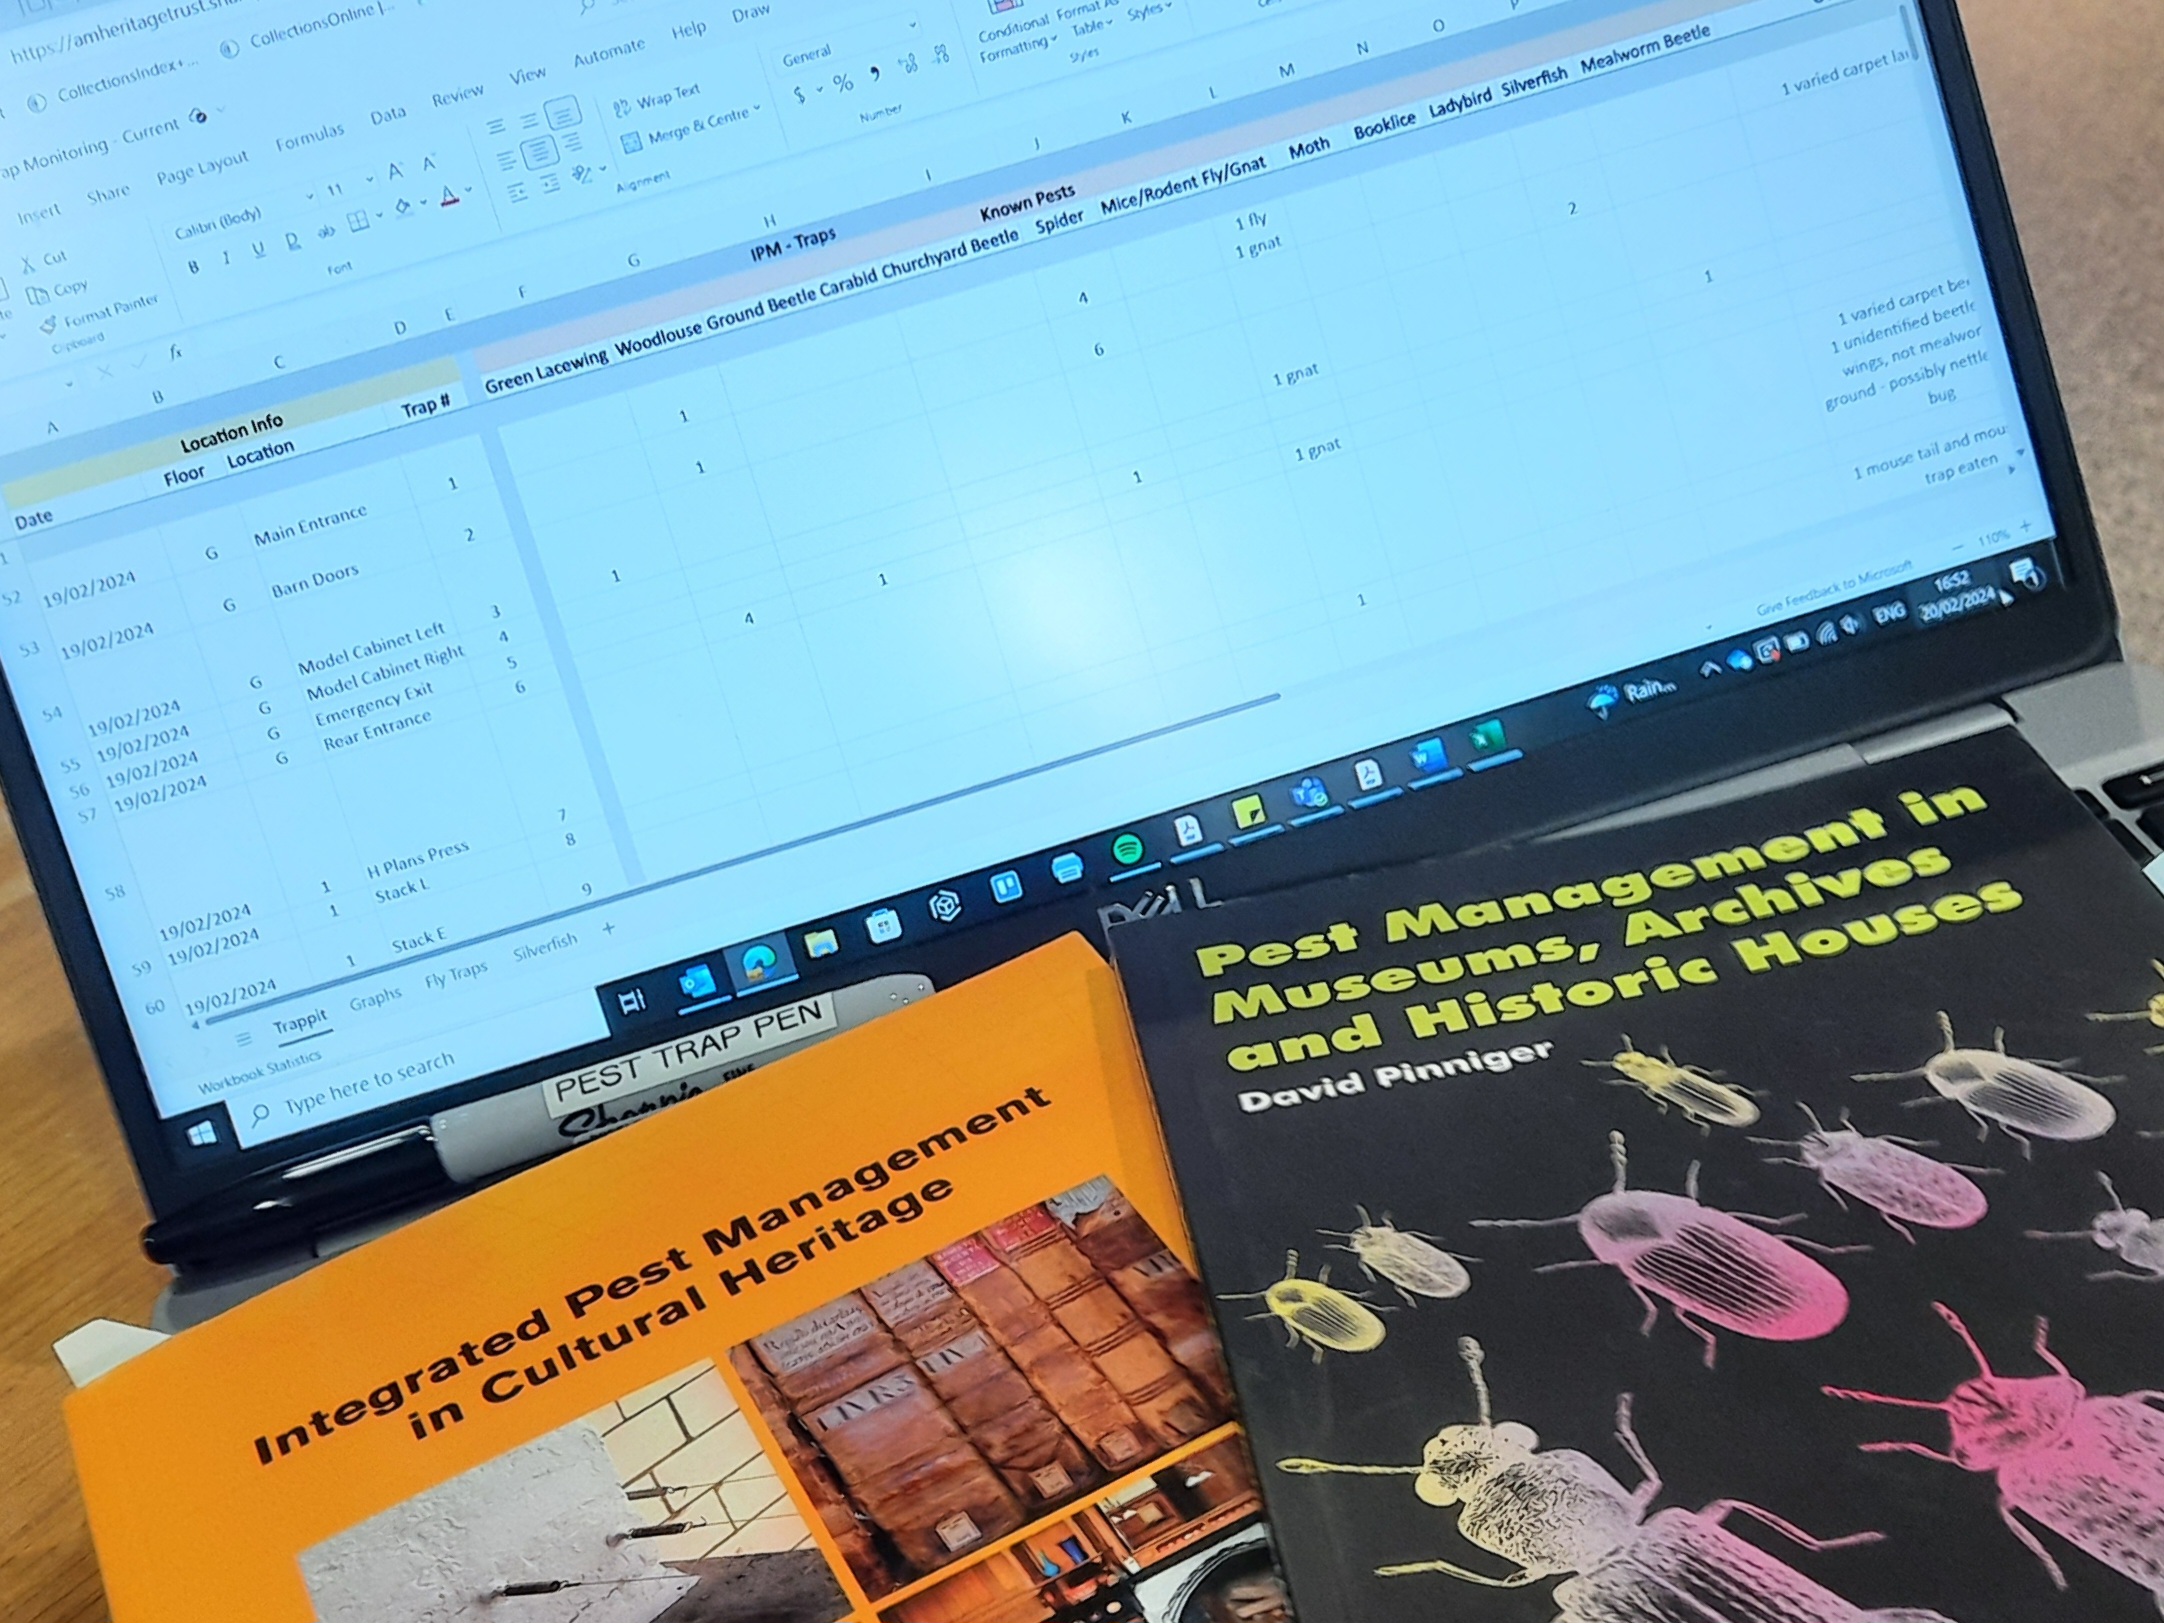 Image shows a laptop open with a spreadsheet showing different types of insect pest species and the quantity of them found in different locations. Infront of the laptop are two books, Integrated Pest Manangement in Cultural Heritage and Pest Management in Museums, Archives and Historic Houses by David Pinniger. There is also a sharpie labelled 'pest trap pen'.